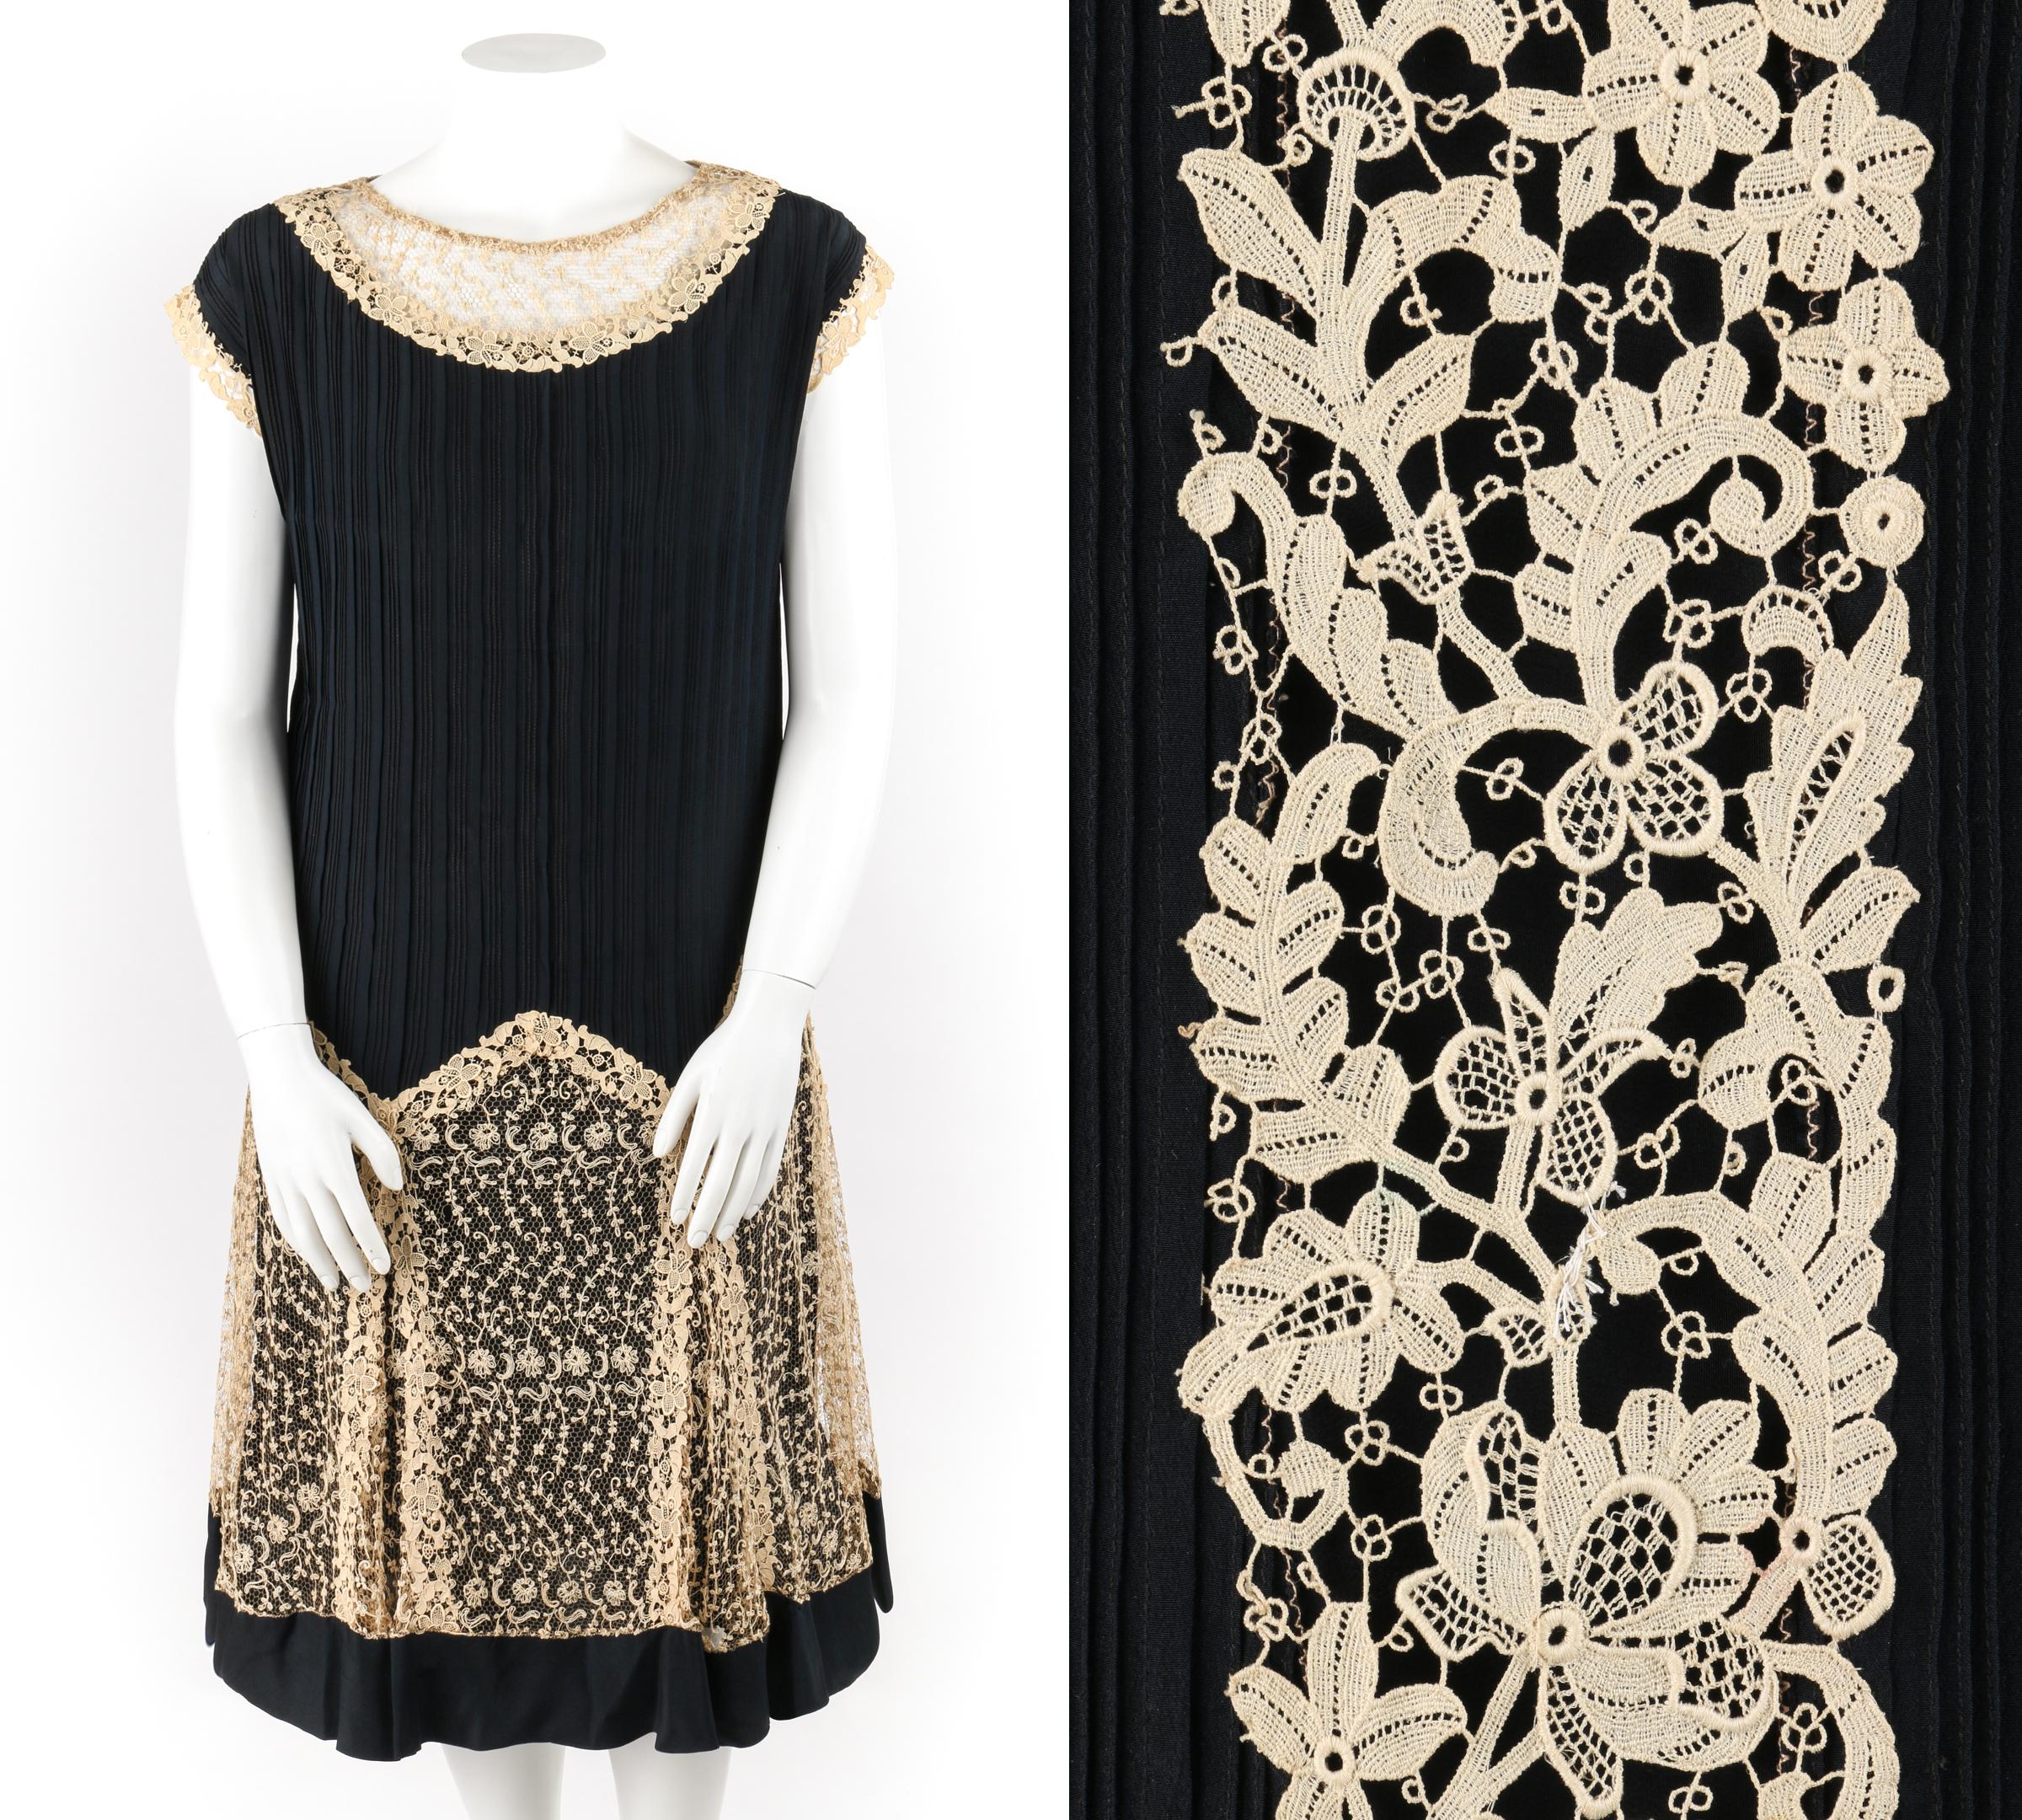 COUTURE c.1920s Black Chiffon Silk Beige Lace Pintuck Flapper Dress Slip Set L
 
Circa: 1920s
Style: Flapper shift dress + slip
Color(s): Black, shades of beige
Lined: No
Unmarked Fabric Content: Silk chiffon (dress, slip); cotton (lace)
Additional